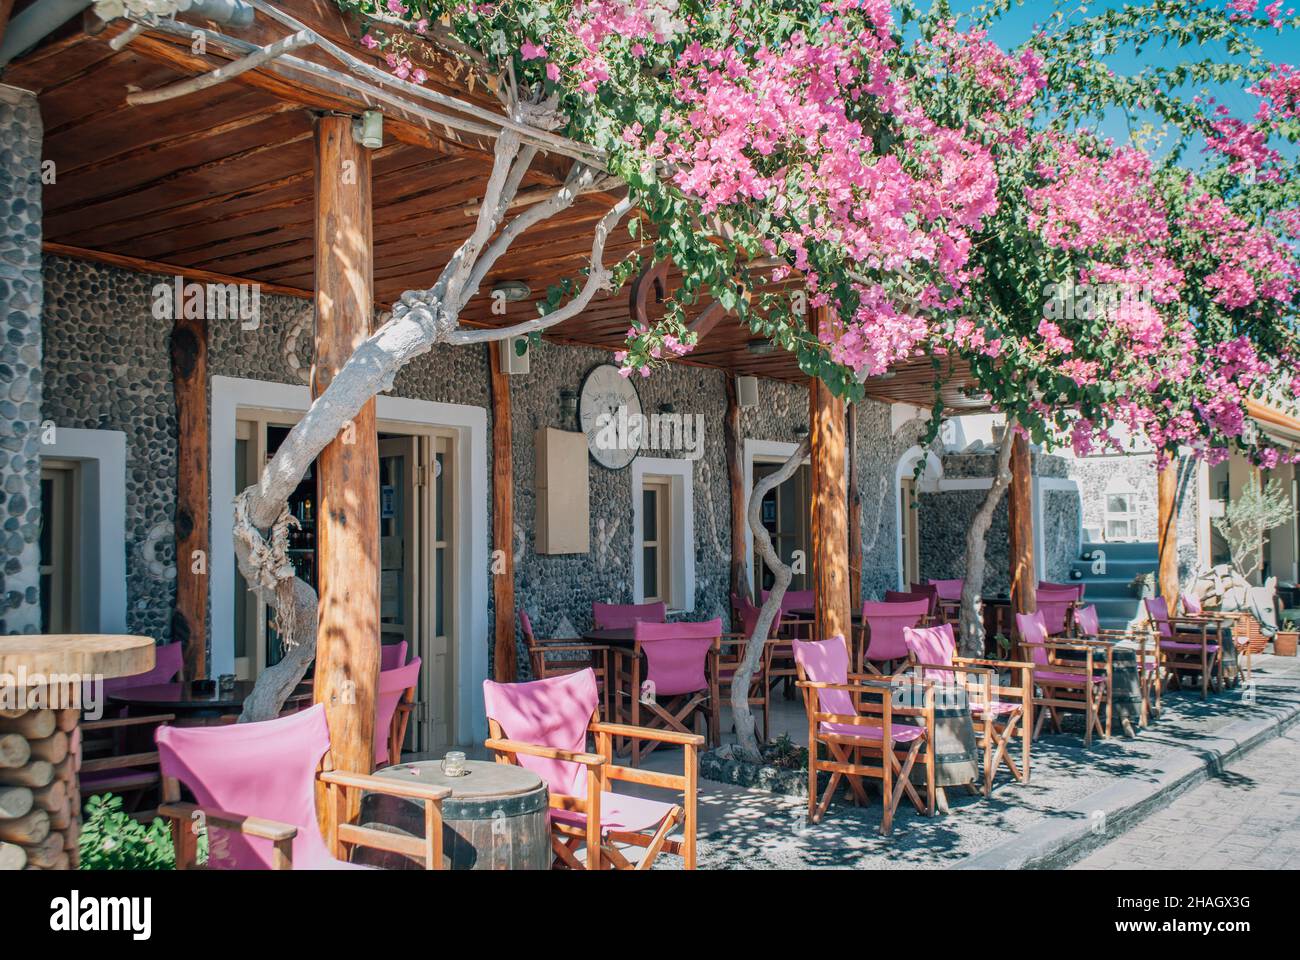 Veranda of the summer cafe with pink armchairs is entwined with pink flowers Stock Photo